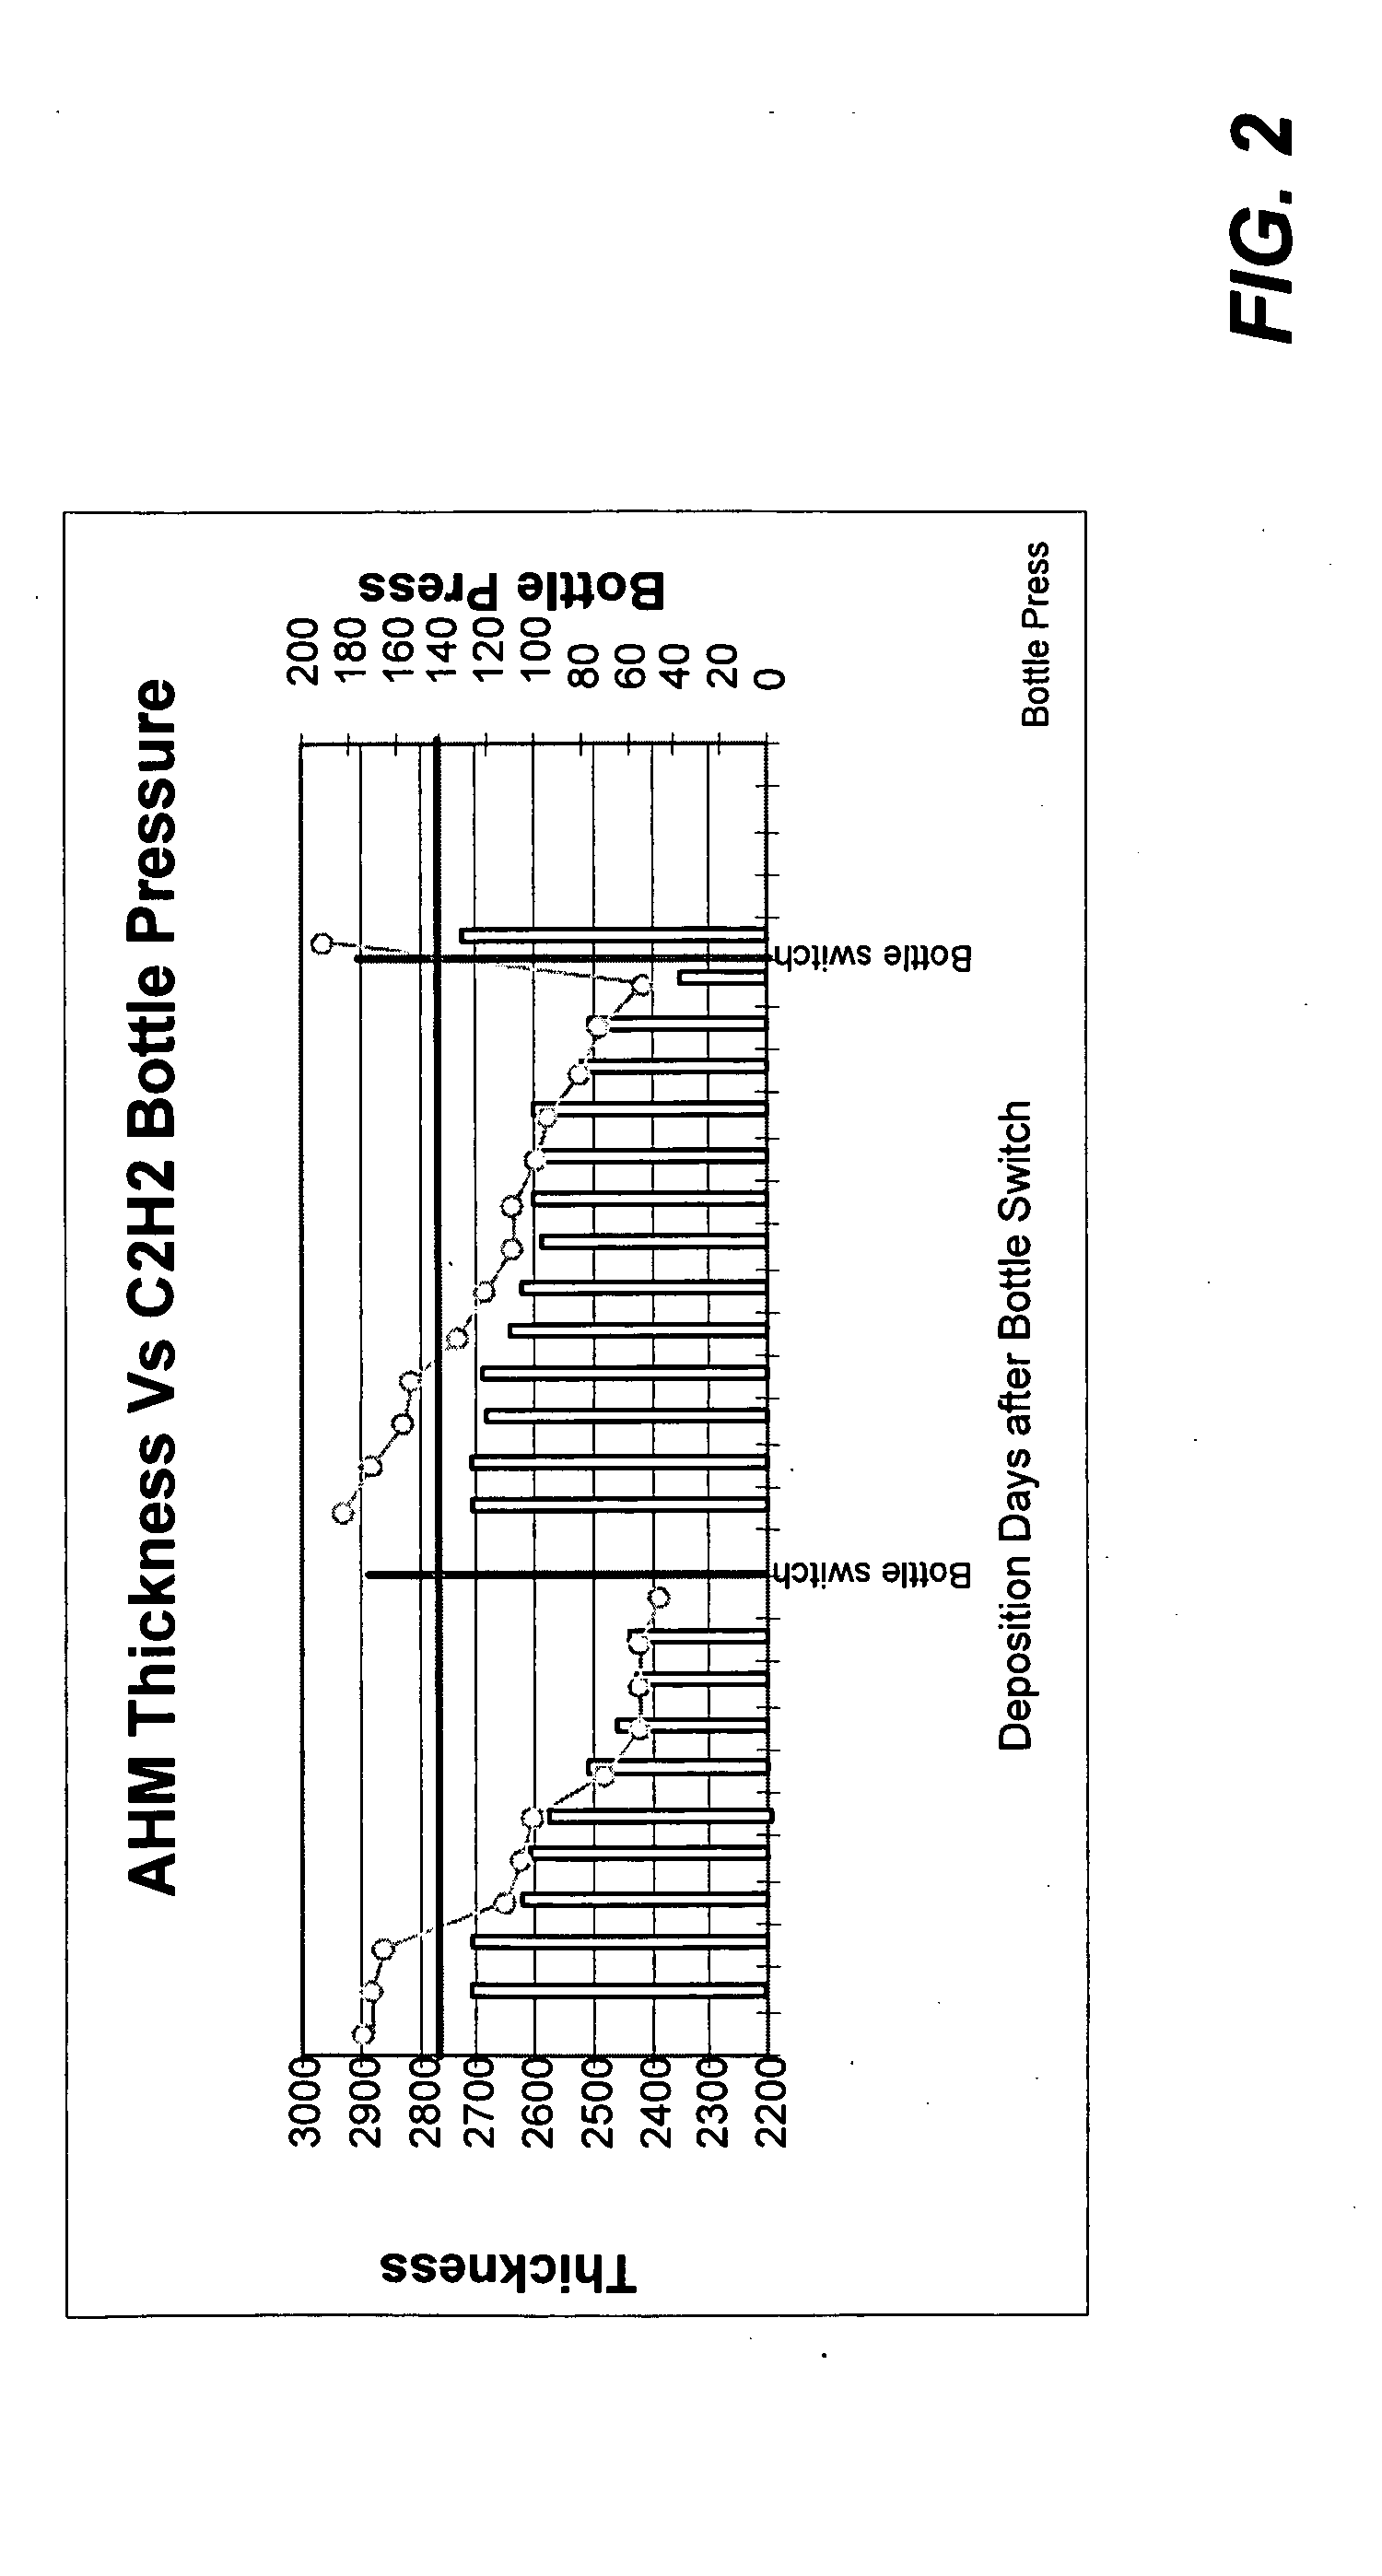 Method for improved thickness repeatability of pecvd deposited carbon films